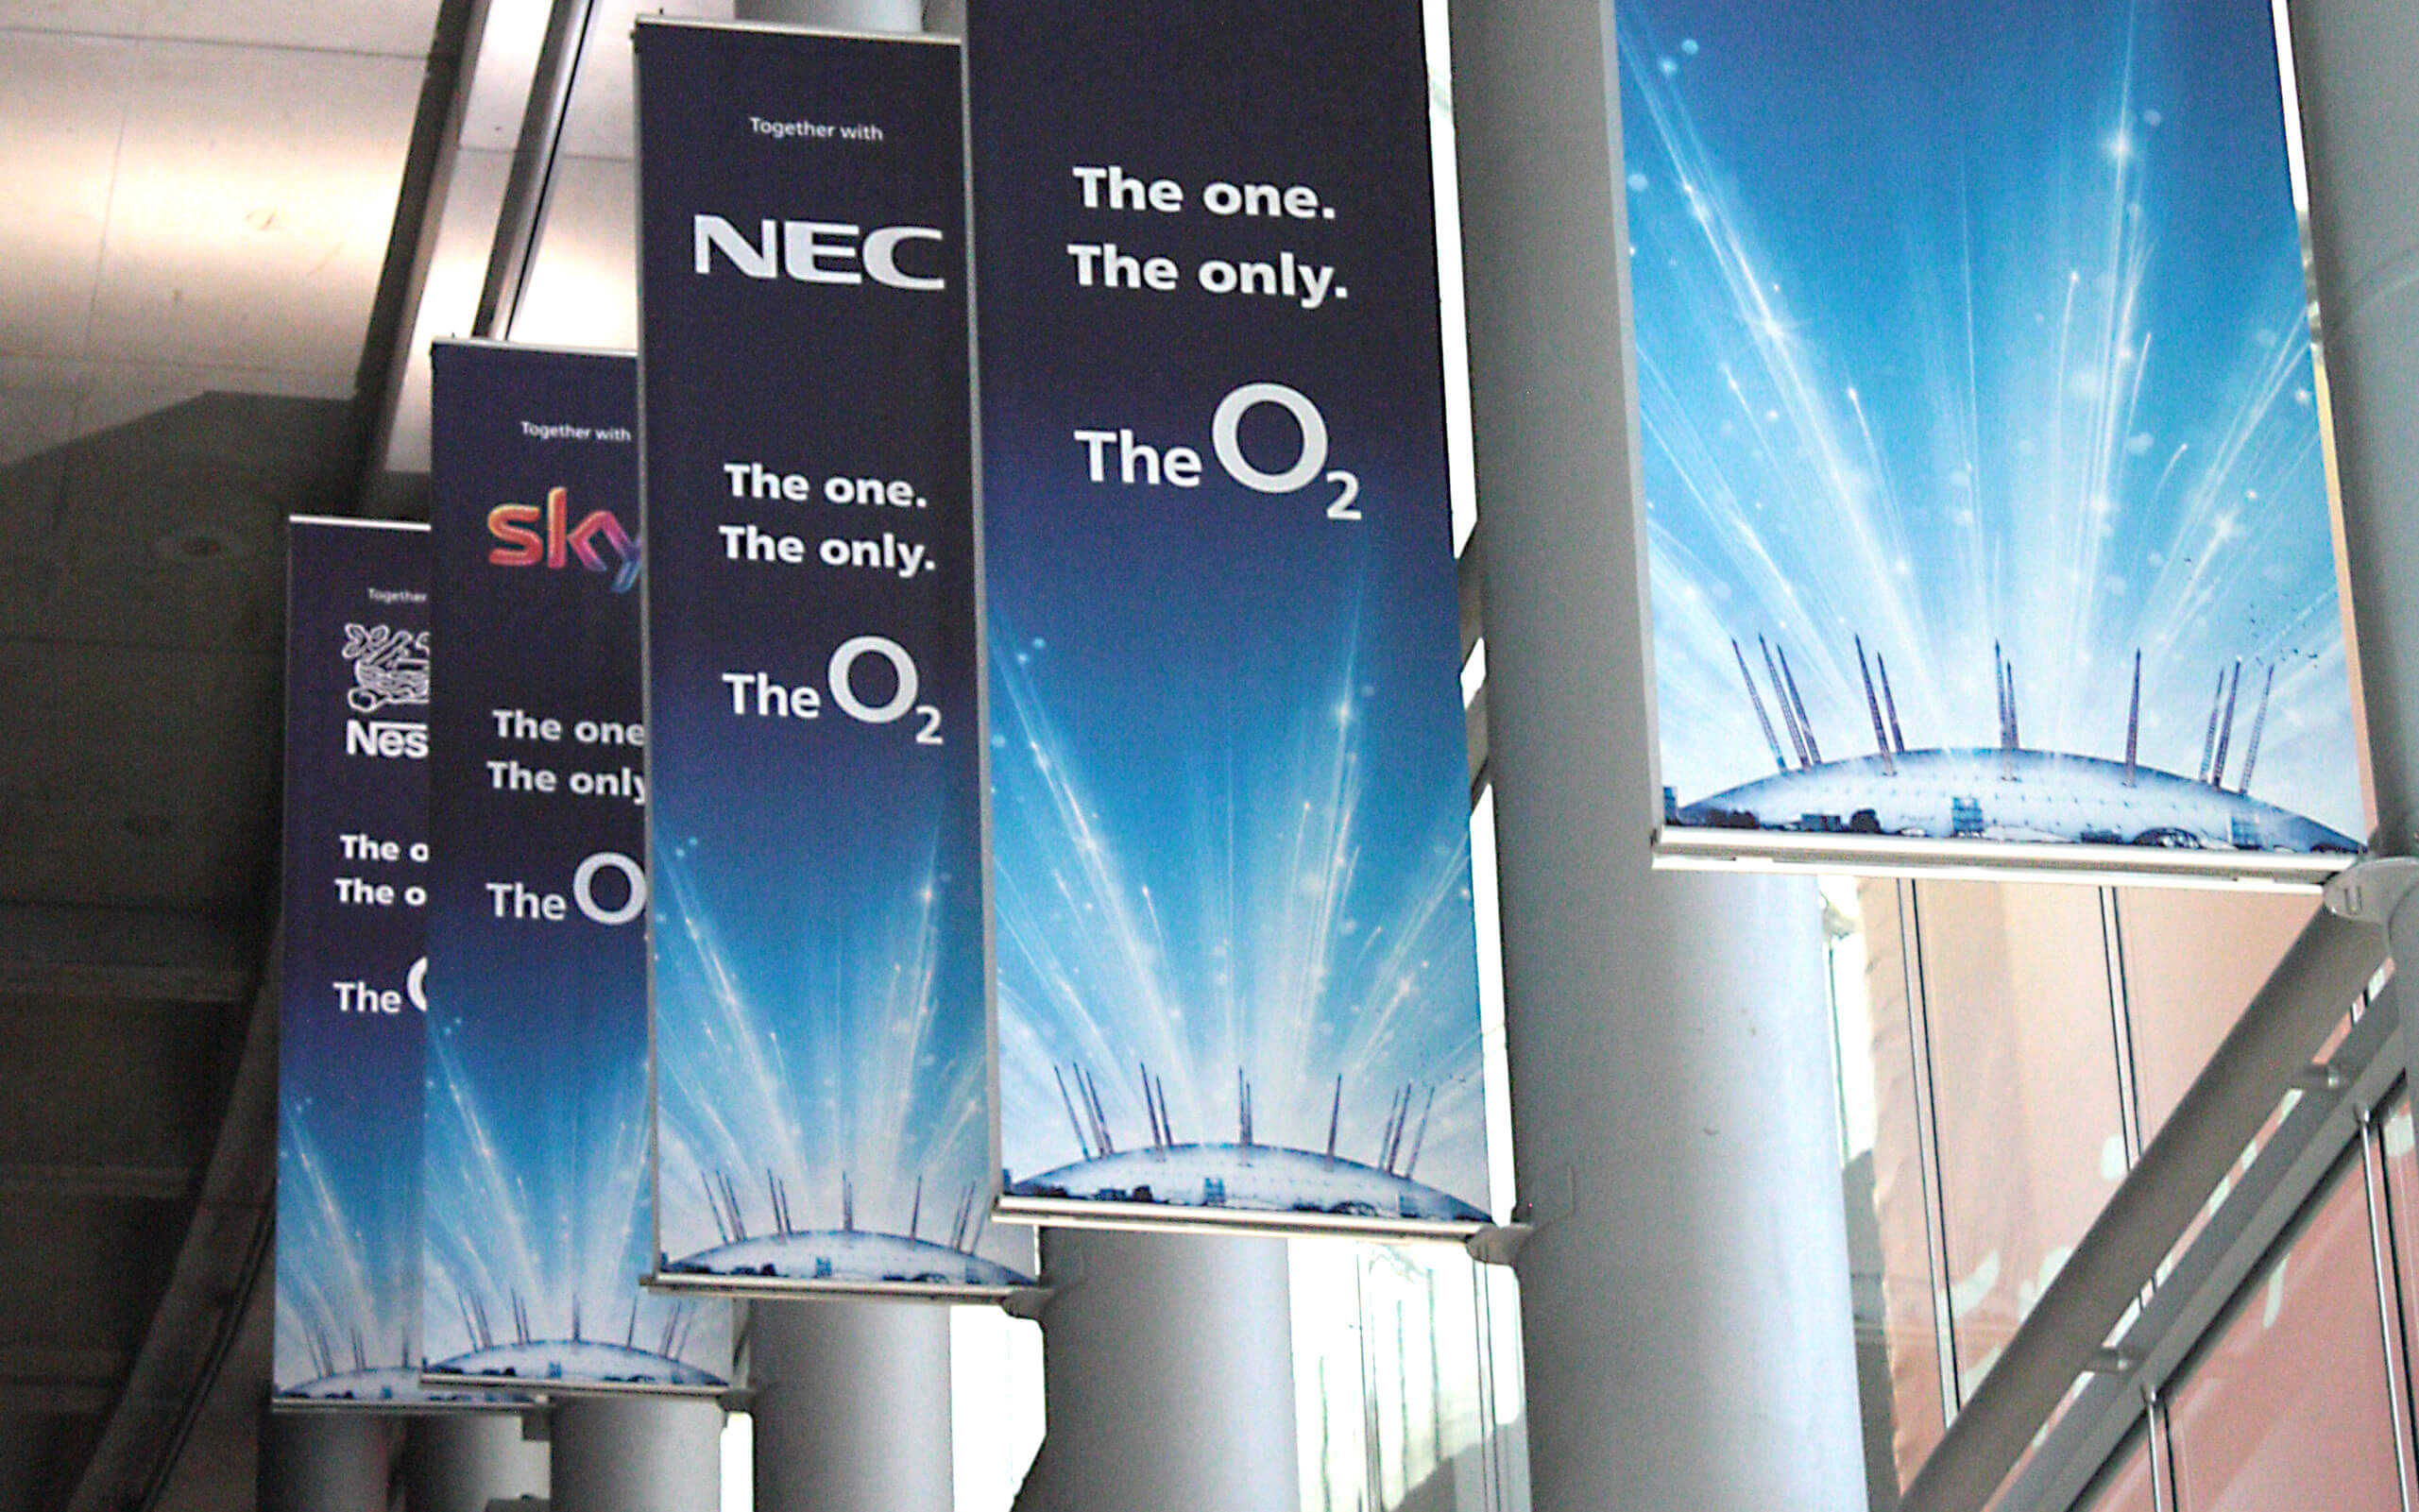 The O2 banners